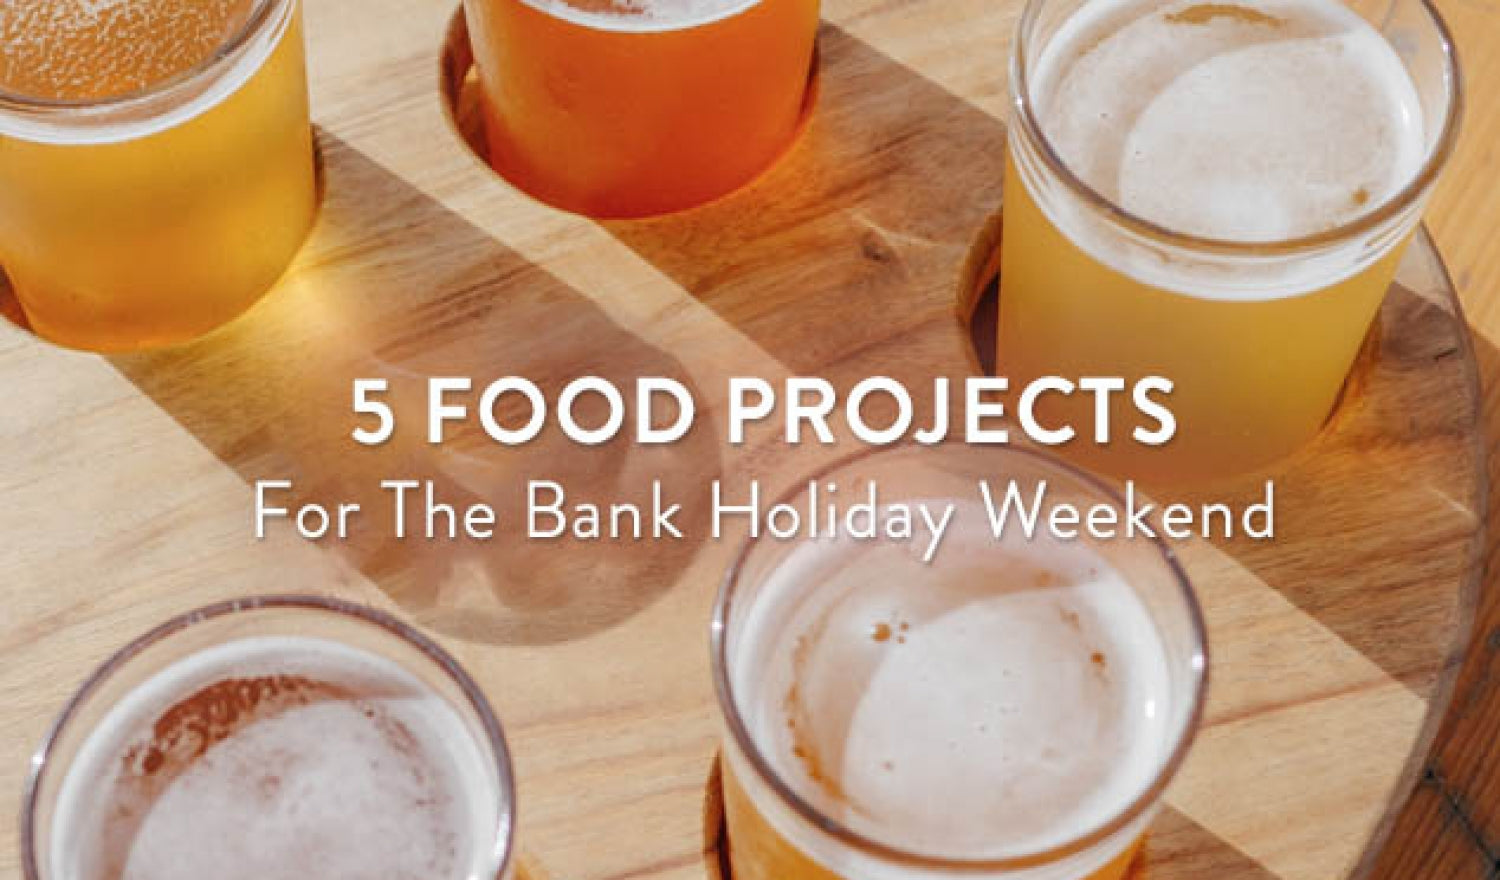 5 Food Projects For The Bank Holiday Weekend